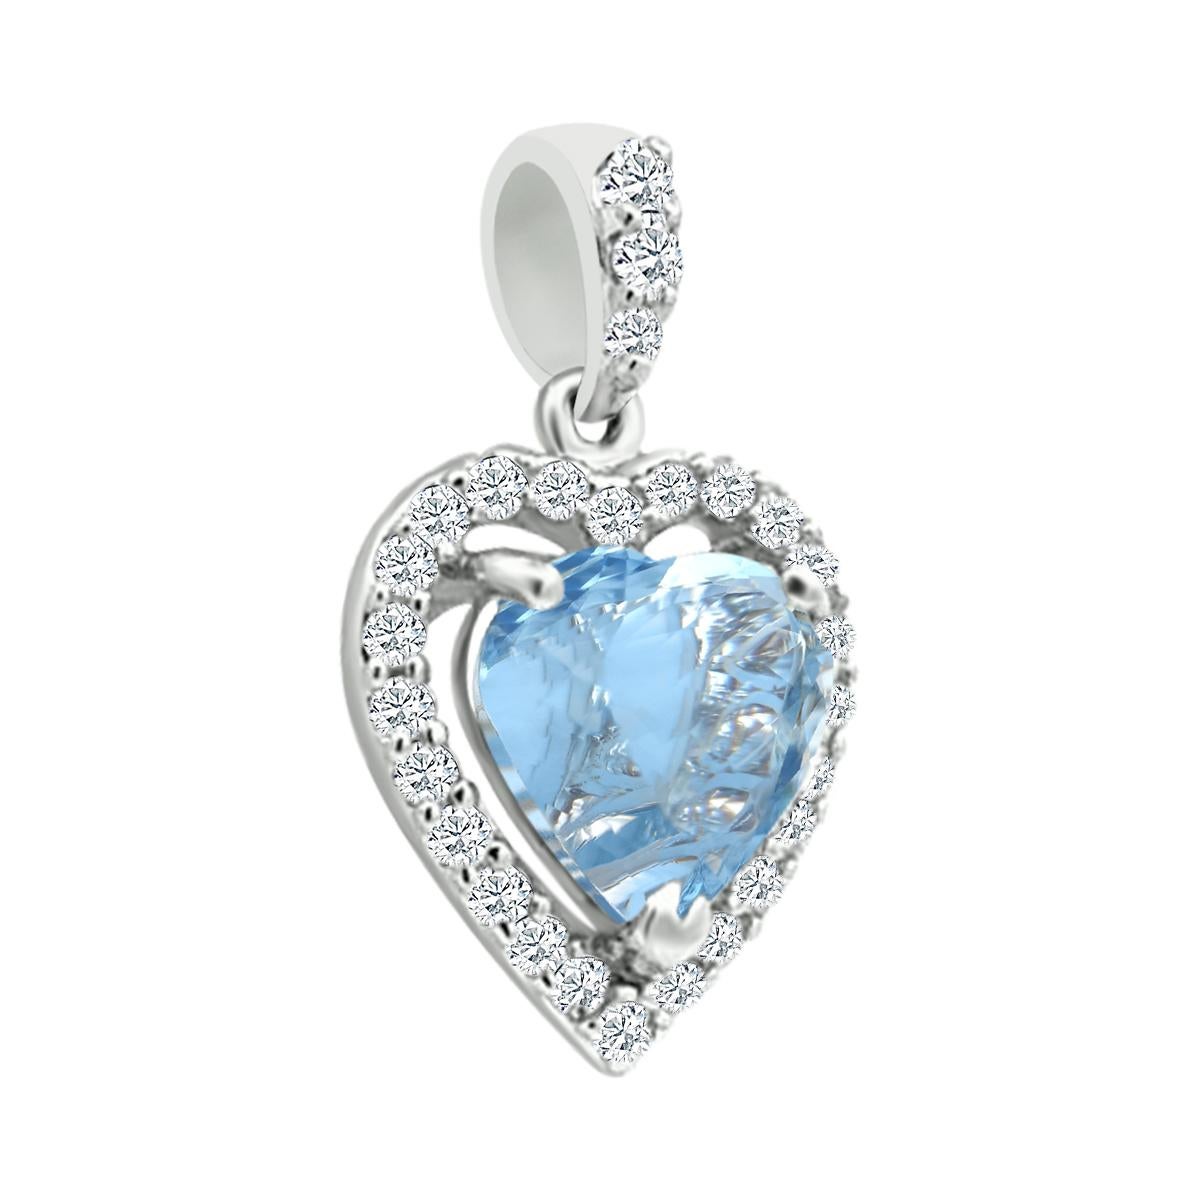 Put Your Heart Into It And Show Off This Lovely Pendant.
A Single Heart - Shaped 7mm Genuine Aquamarine Gemstone Is Held In Place With Diamonds Around It.
This Pendant Is Crafted In 14K White Gold, Simple Yet Stunning, It Will Enchant Your Everyday